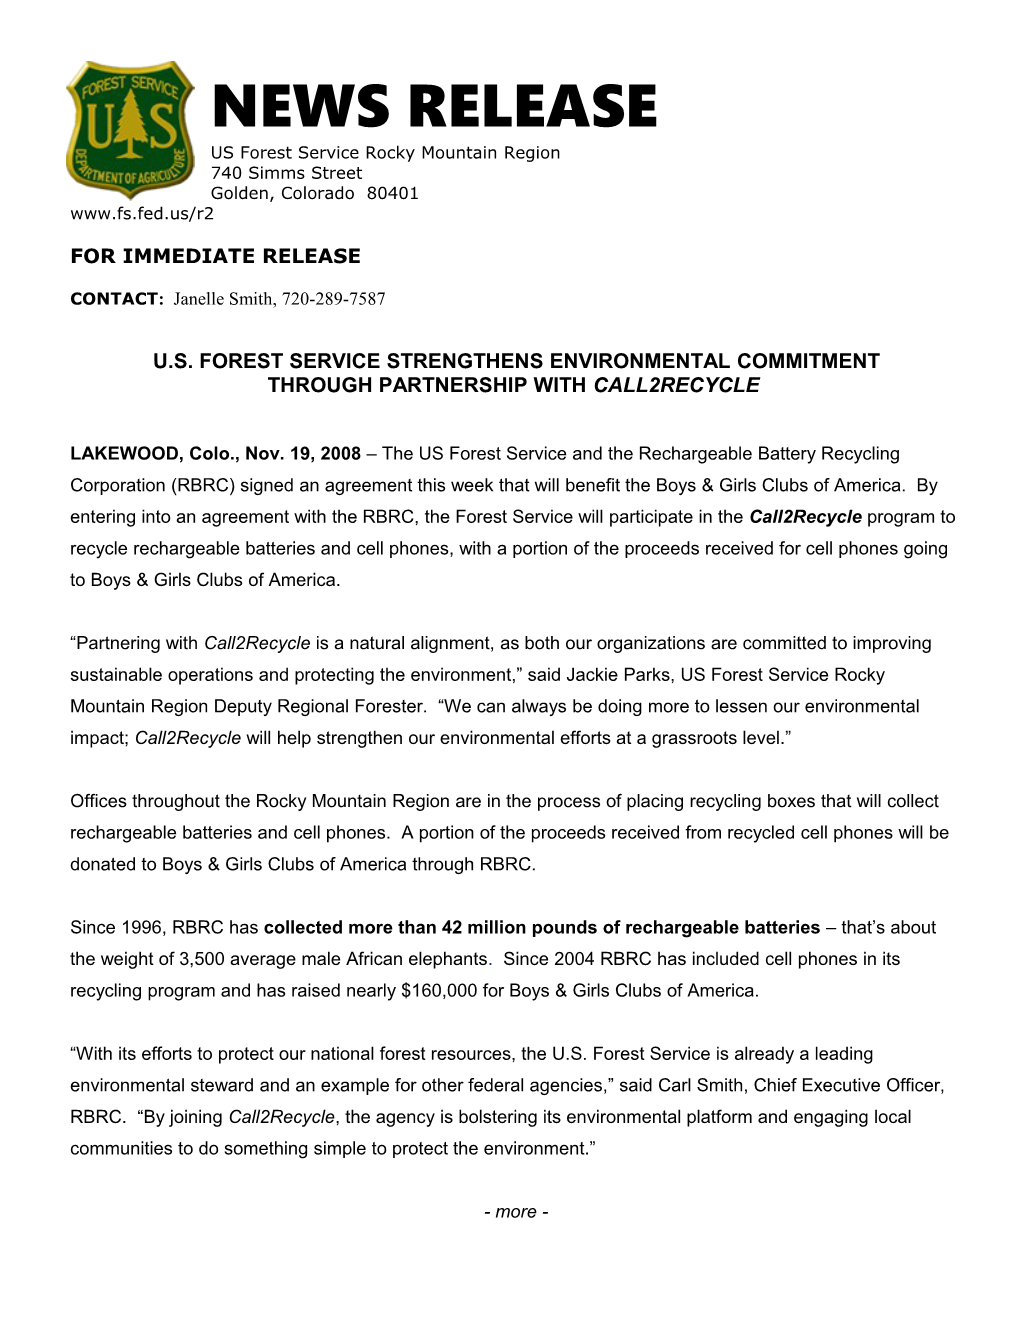 US Forest Service, Sustainable Operations